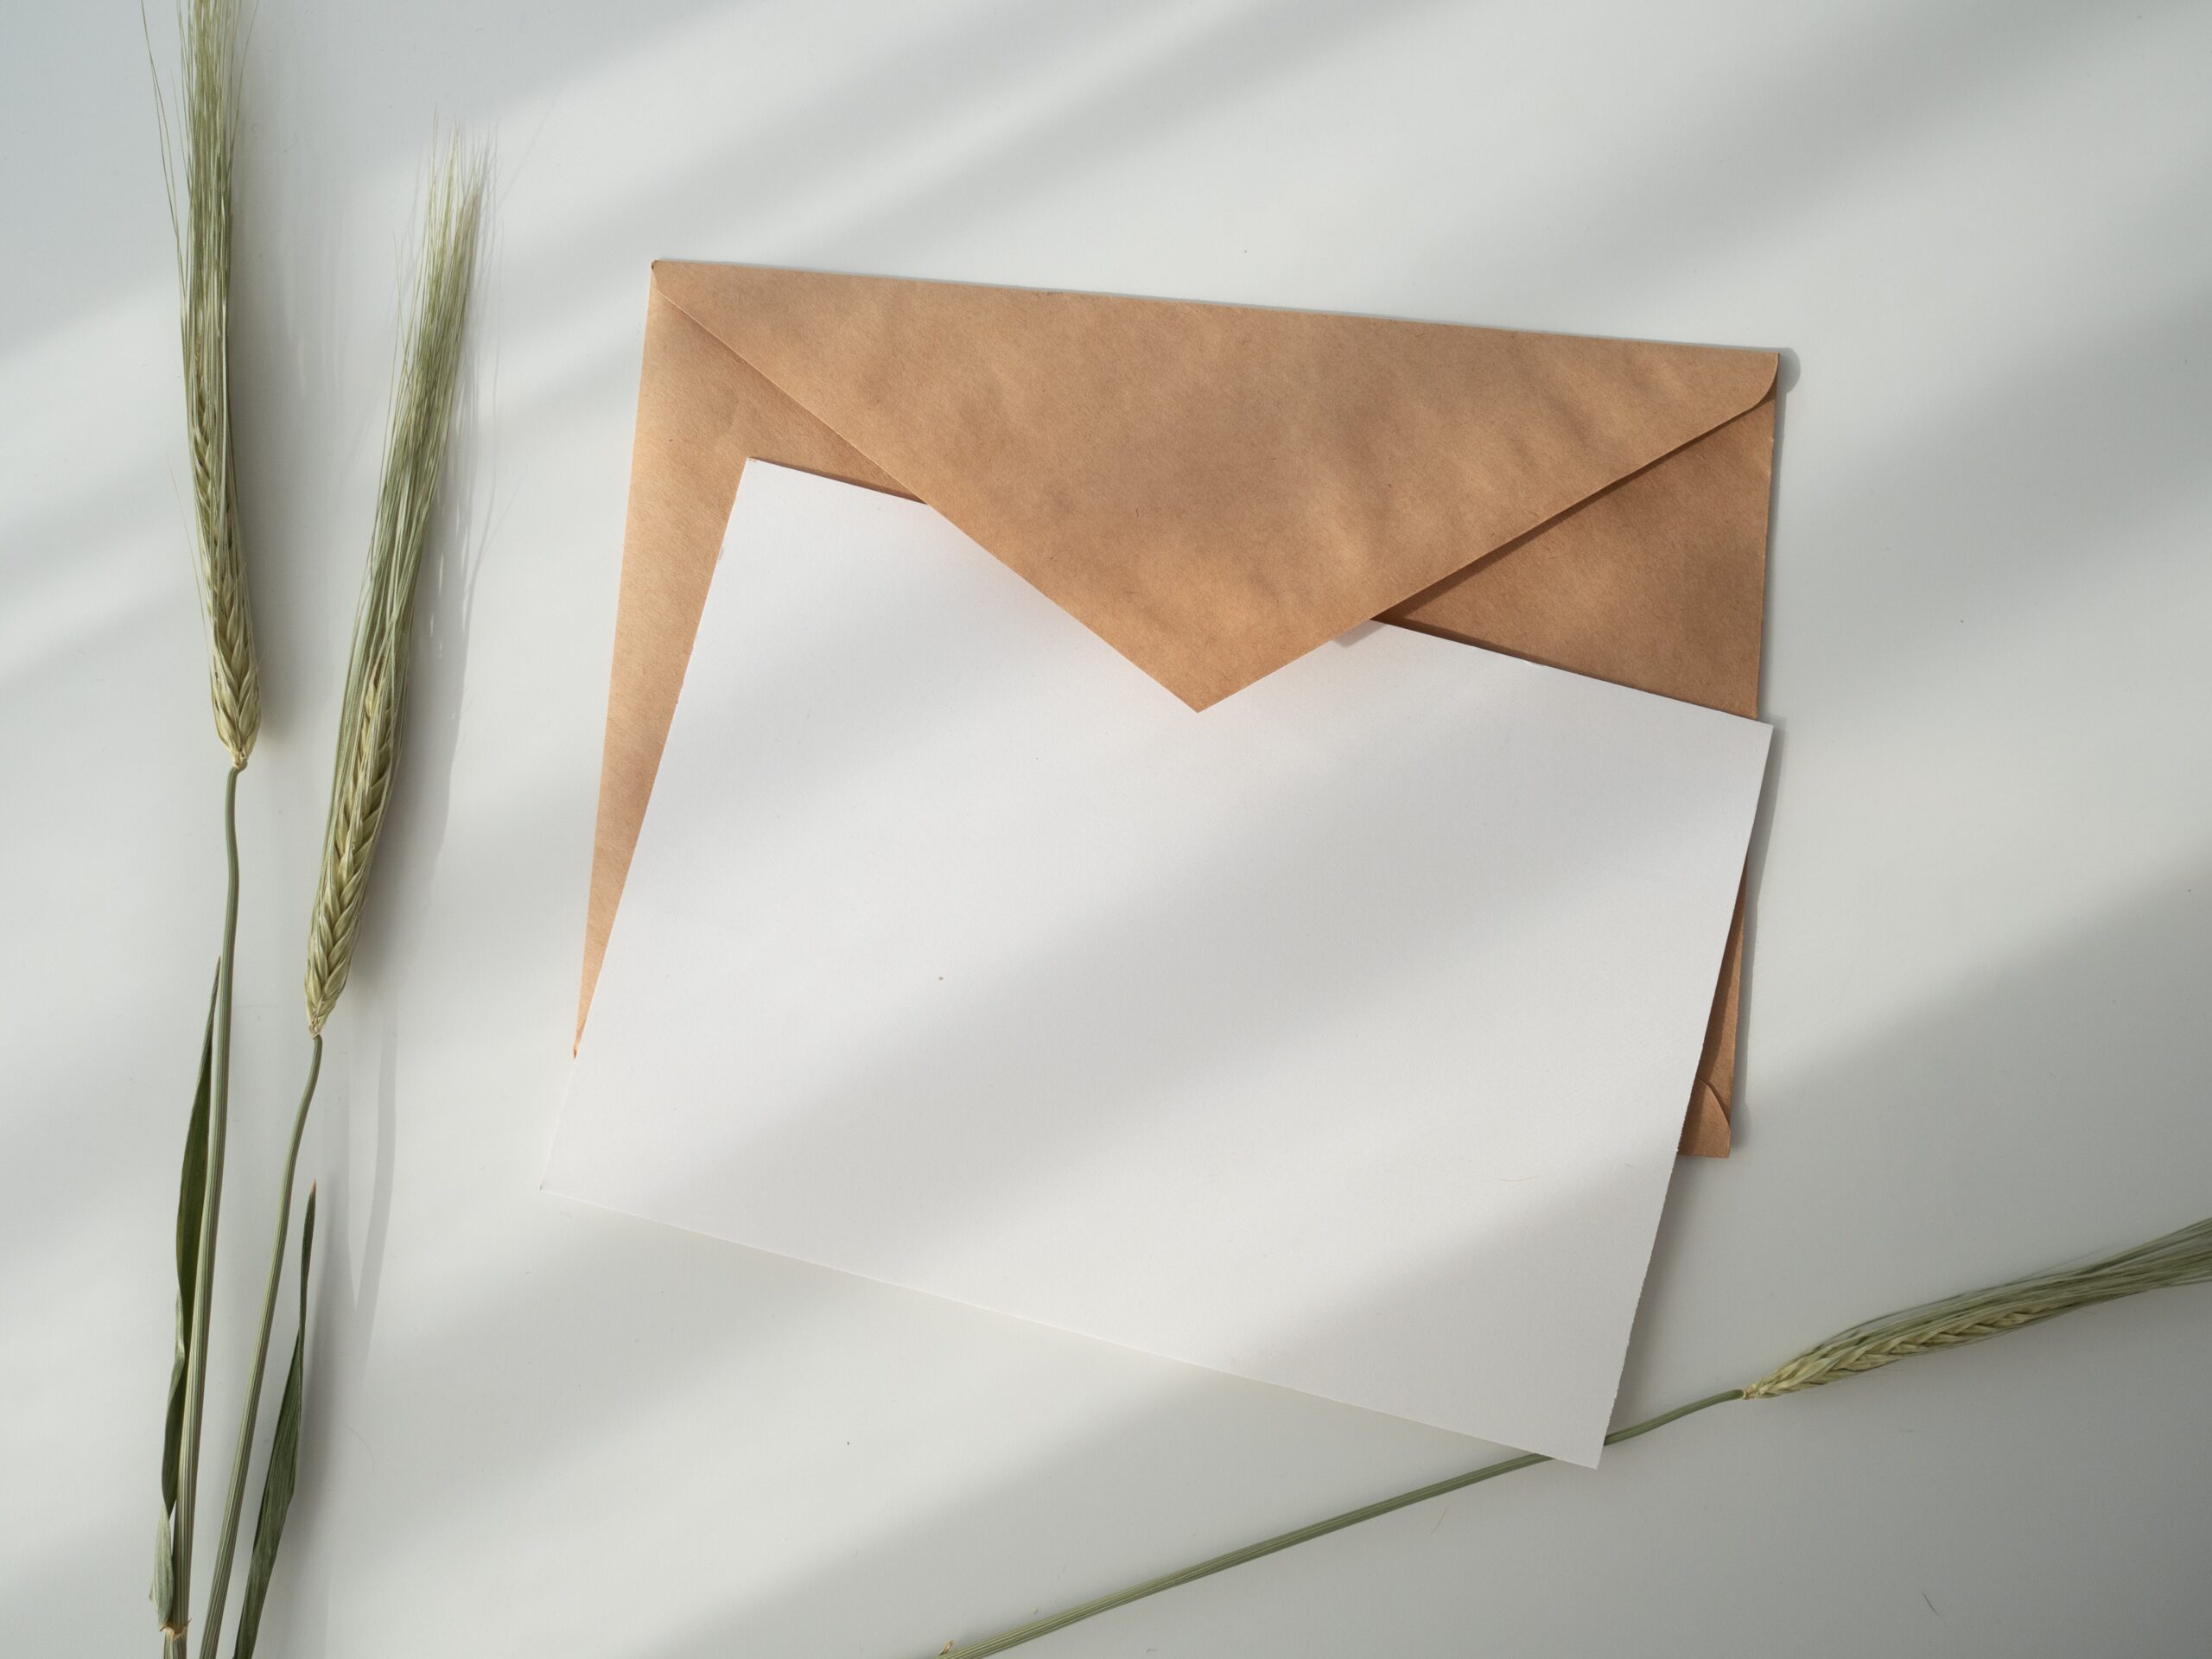 Envelope and paper